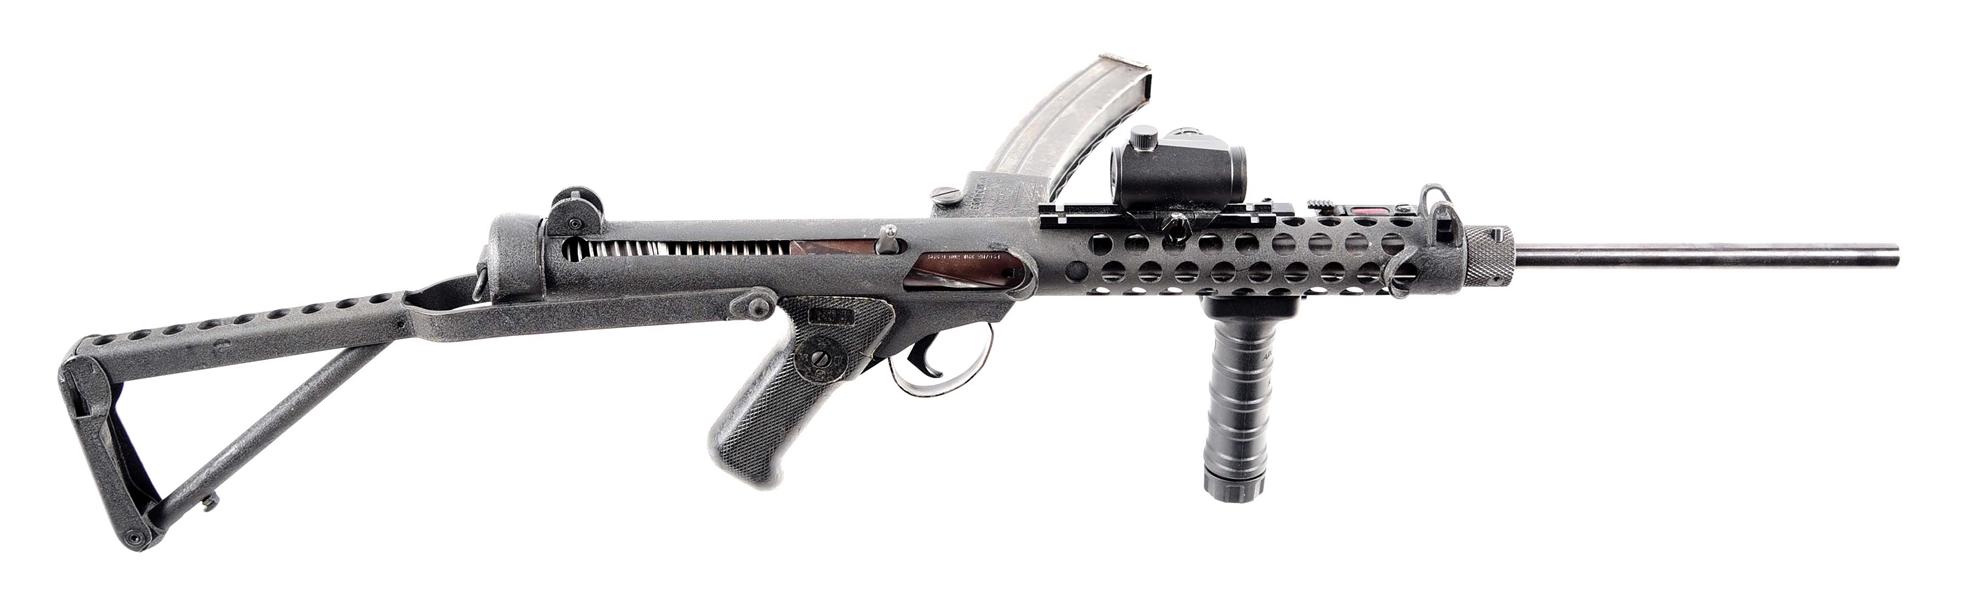 (M) WISE LITE ARMS STERLING SPORTER SEMI AUTOMATIC RIFLE